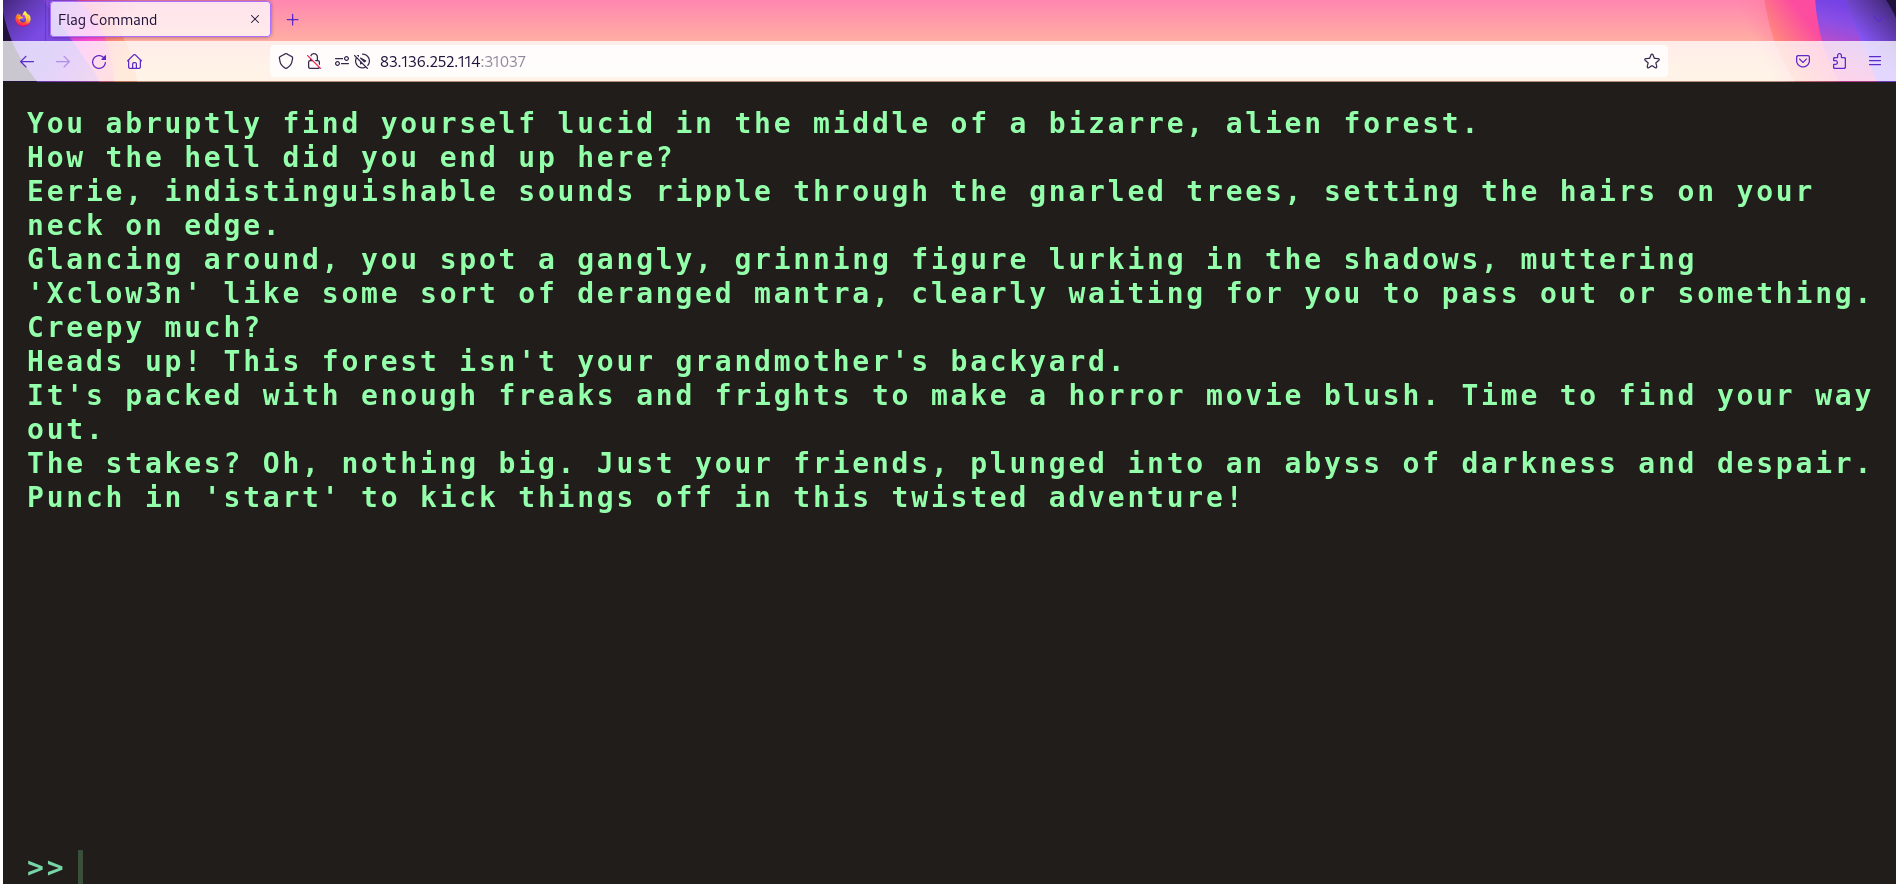 The website displays a terminal-like prompt